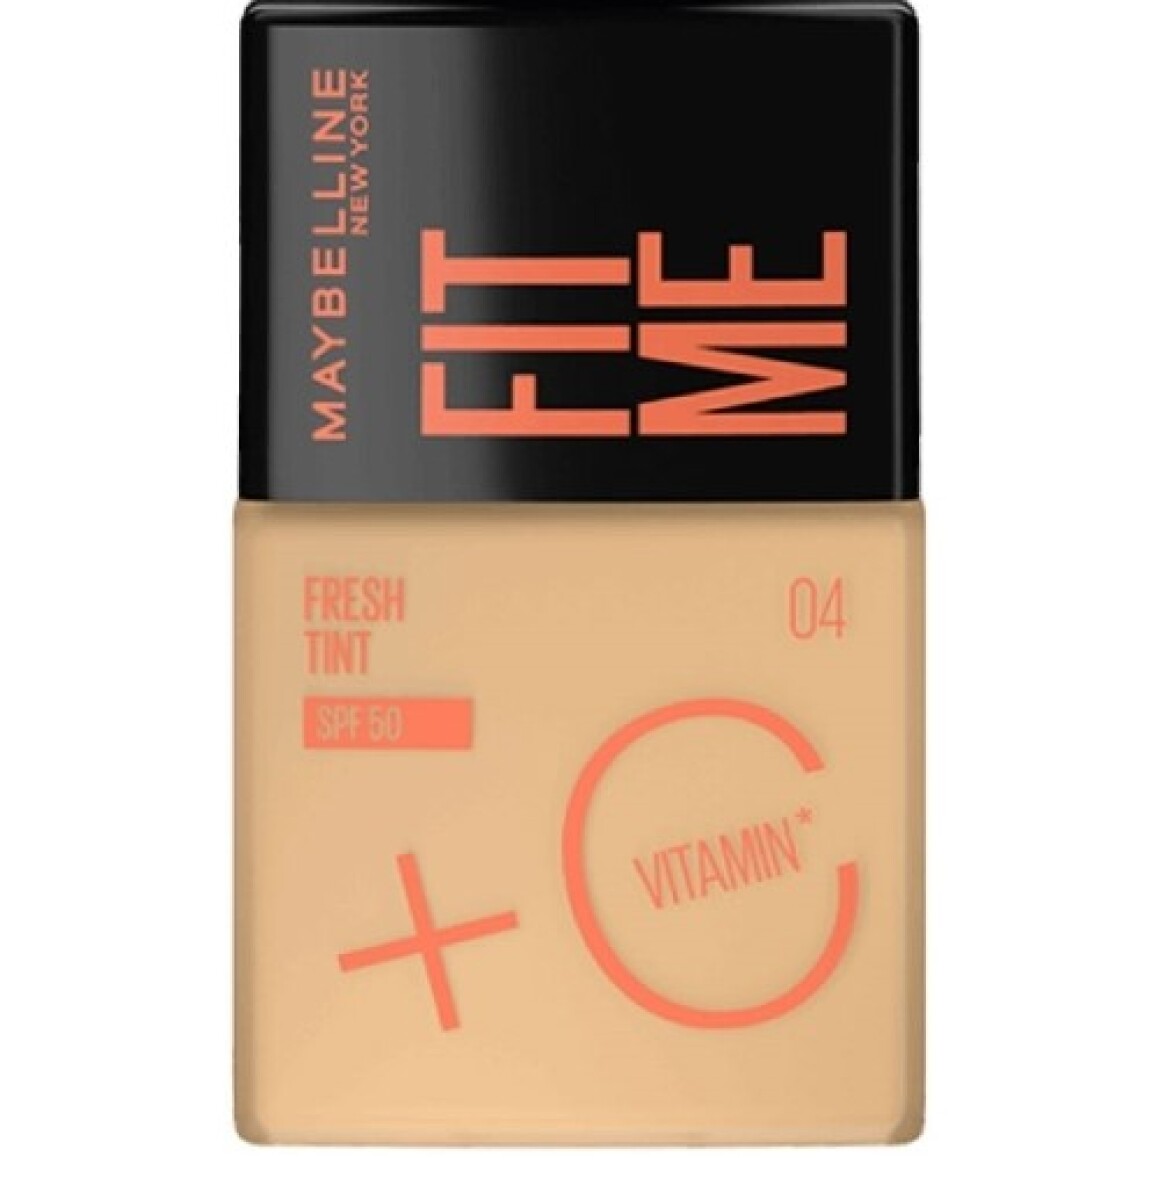 Maybelline Base Fit Me Fresh Tint Spf50 4 As X 1 Un 